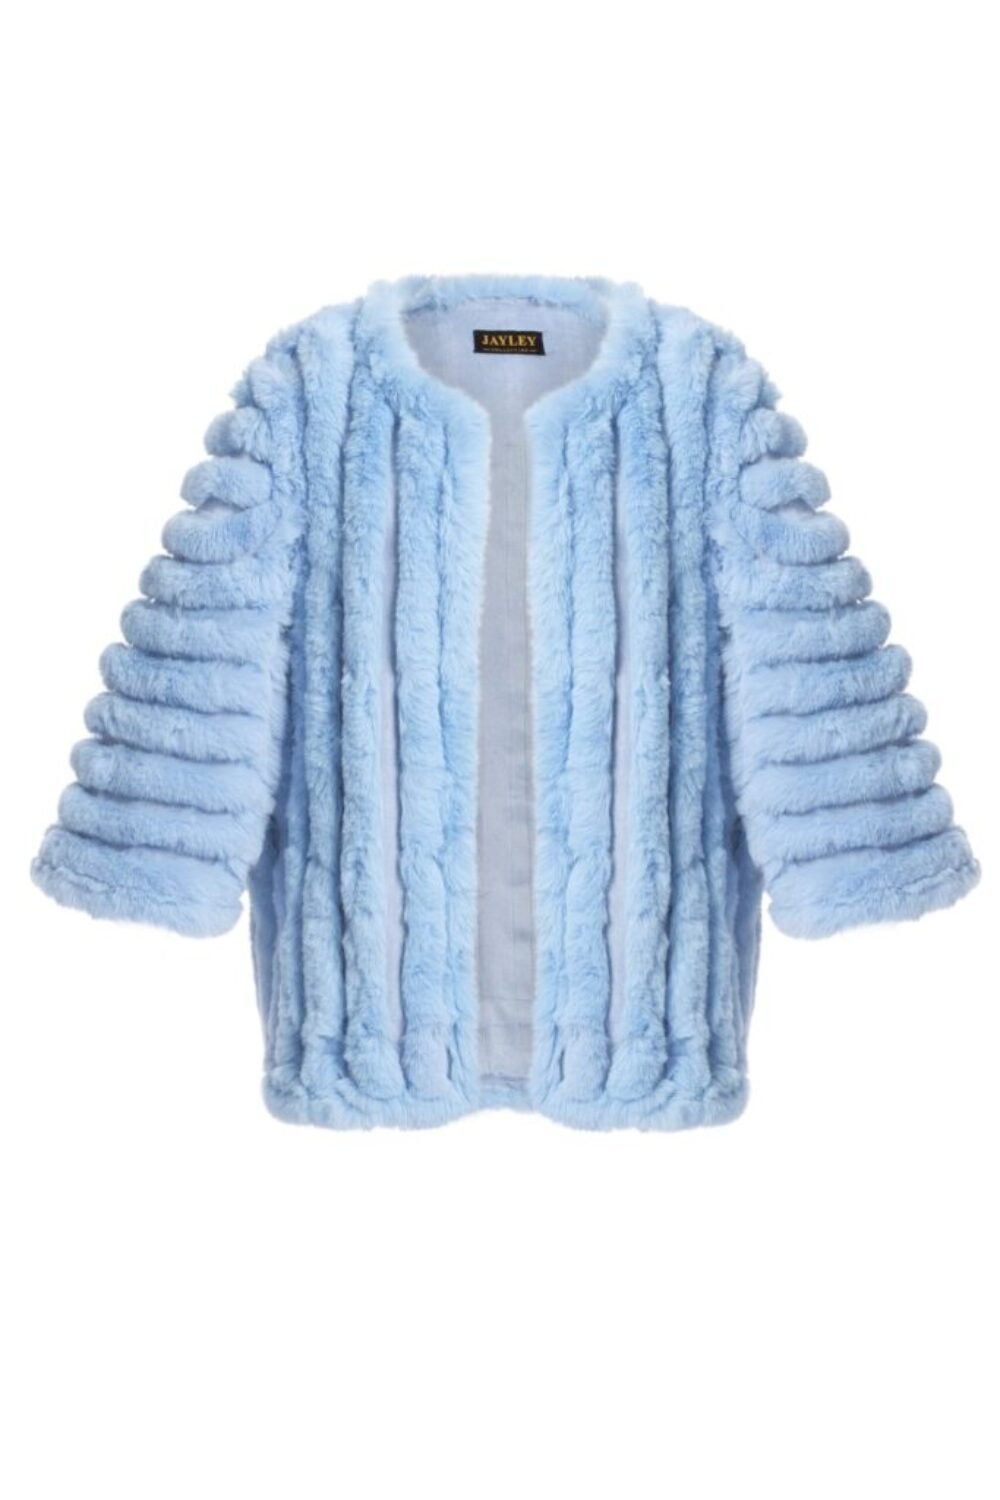 Shop Lux Blue Faux Fur Striped Coat and women's luxury and designer clothes at www.lux-apparel.co.uk